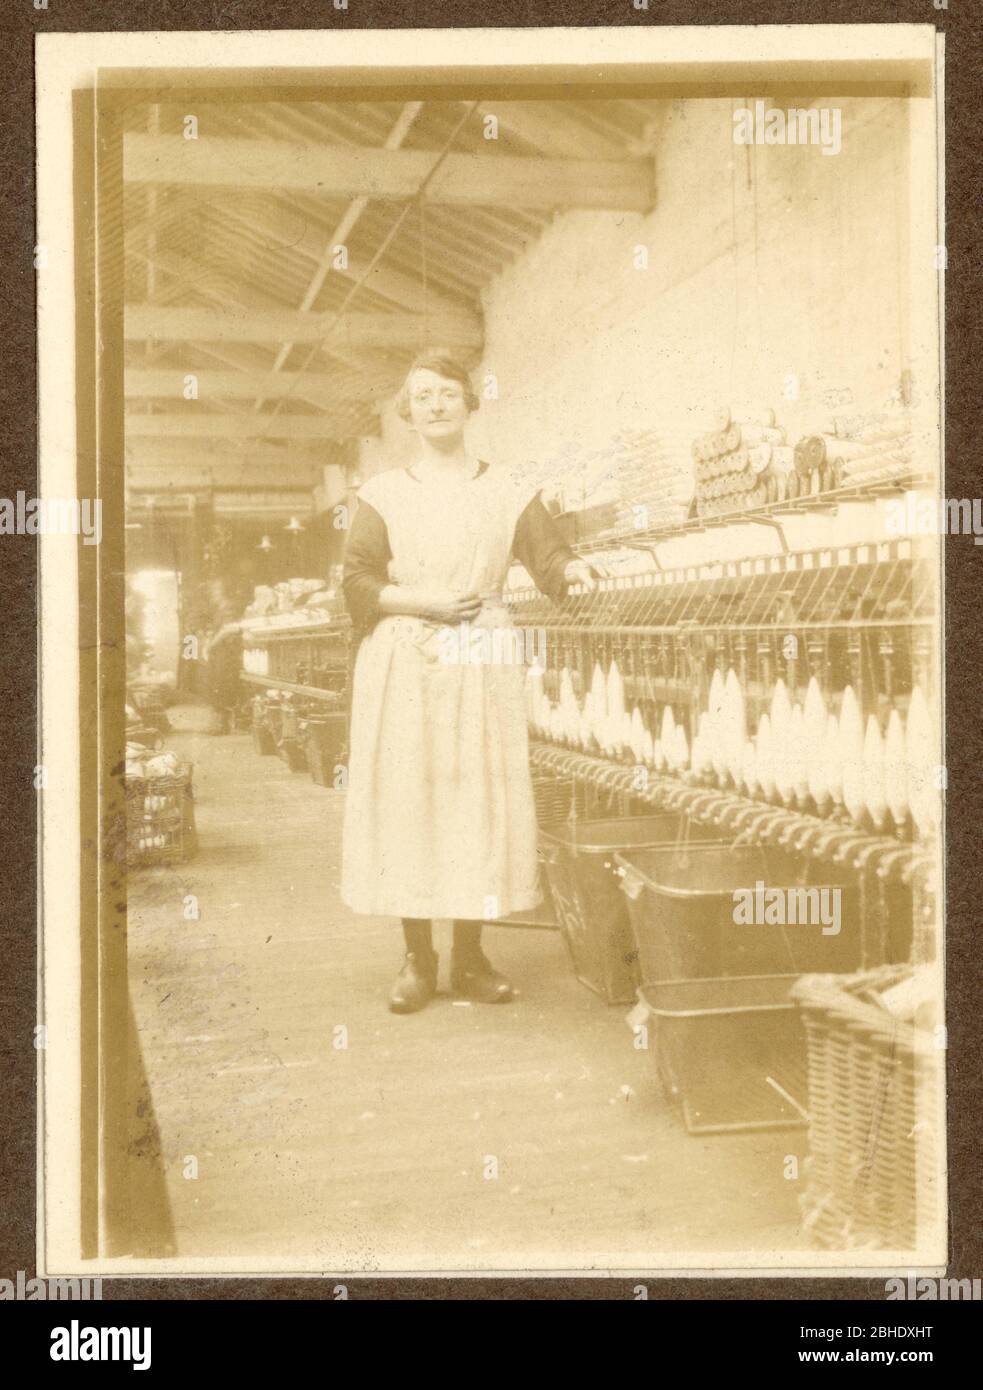 Early 1900's photograph of Lancashire cotton spinner, standing next to a spinning mule  in a cotton mill, wearing clogs, Radcliffe, Lancashire, U.K. circa 1917 Stock Photo